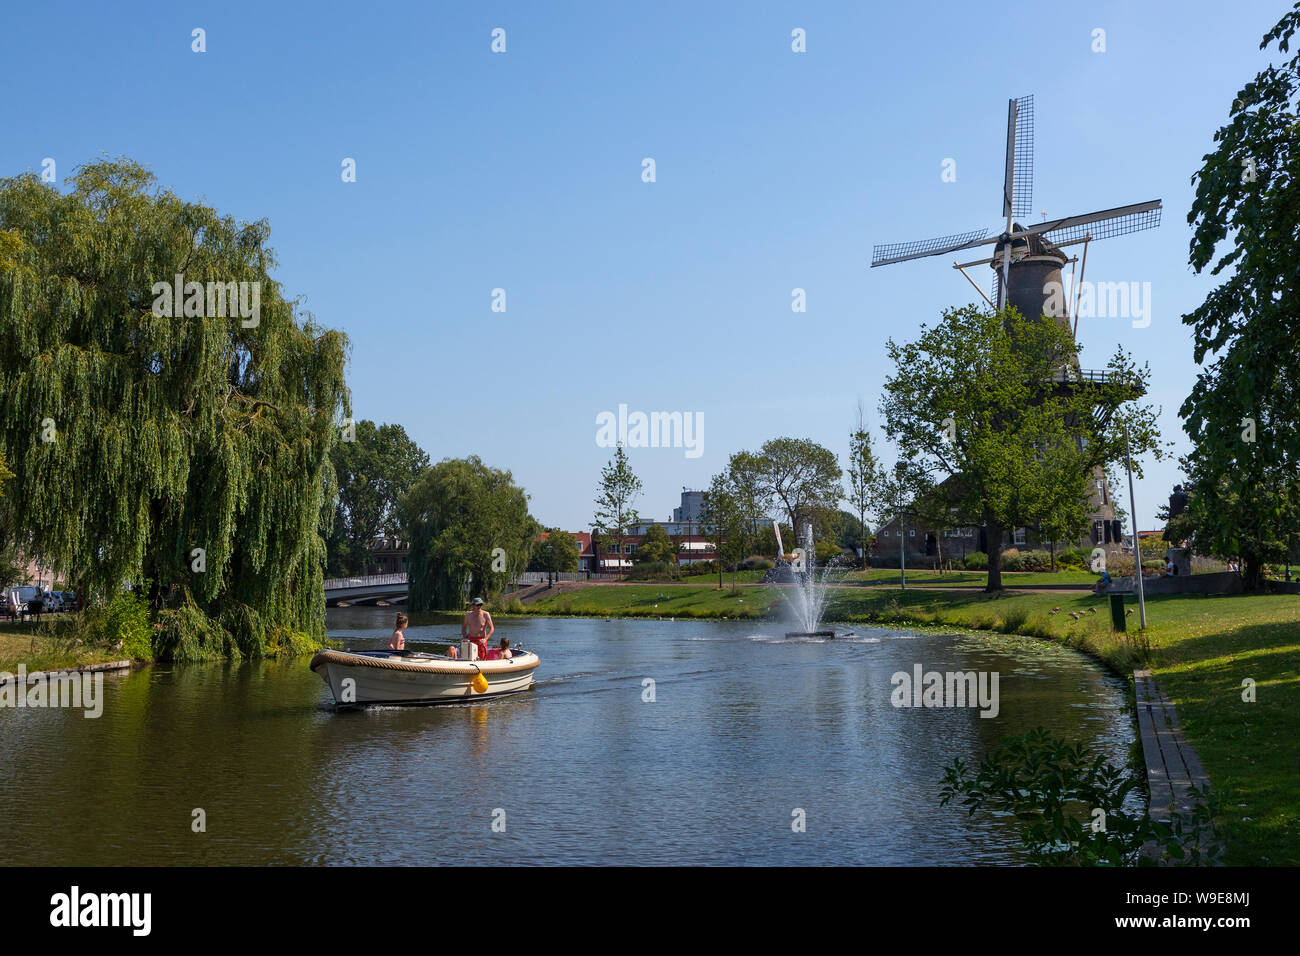 Leiden, Holland - July 26, 2019: Sailing a recreational boat with the historical tower mill de Valk, the Falcon, in the background Stock Photo